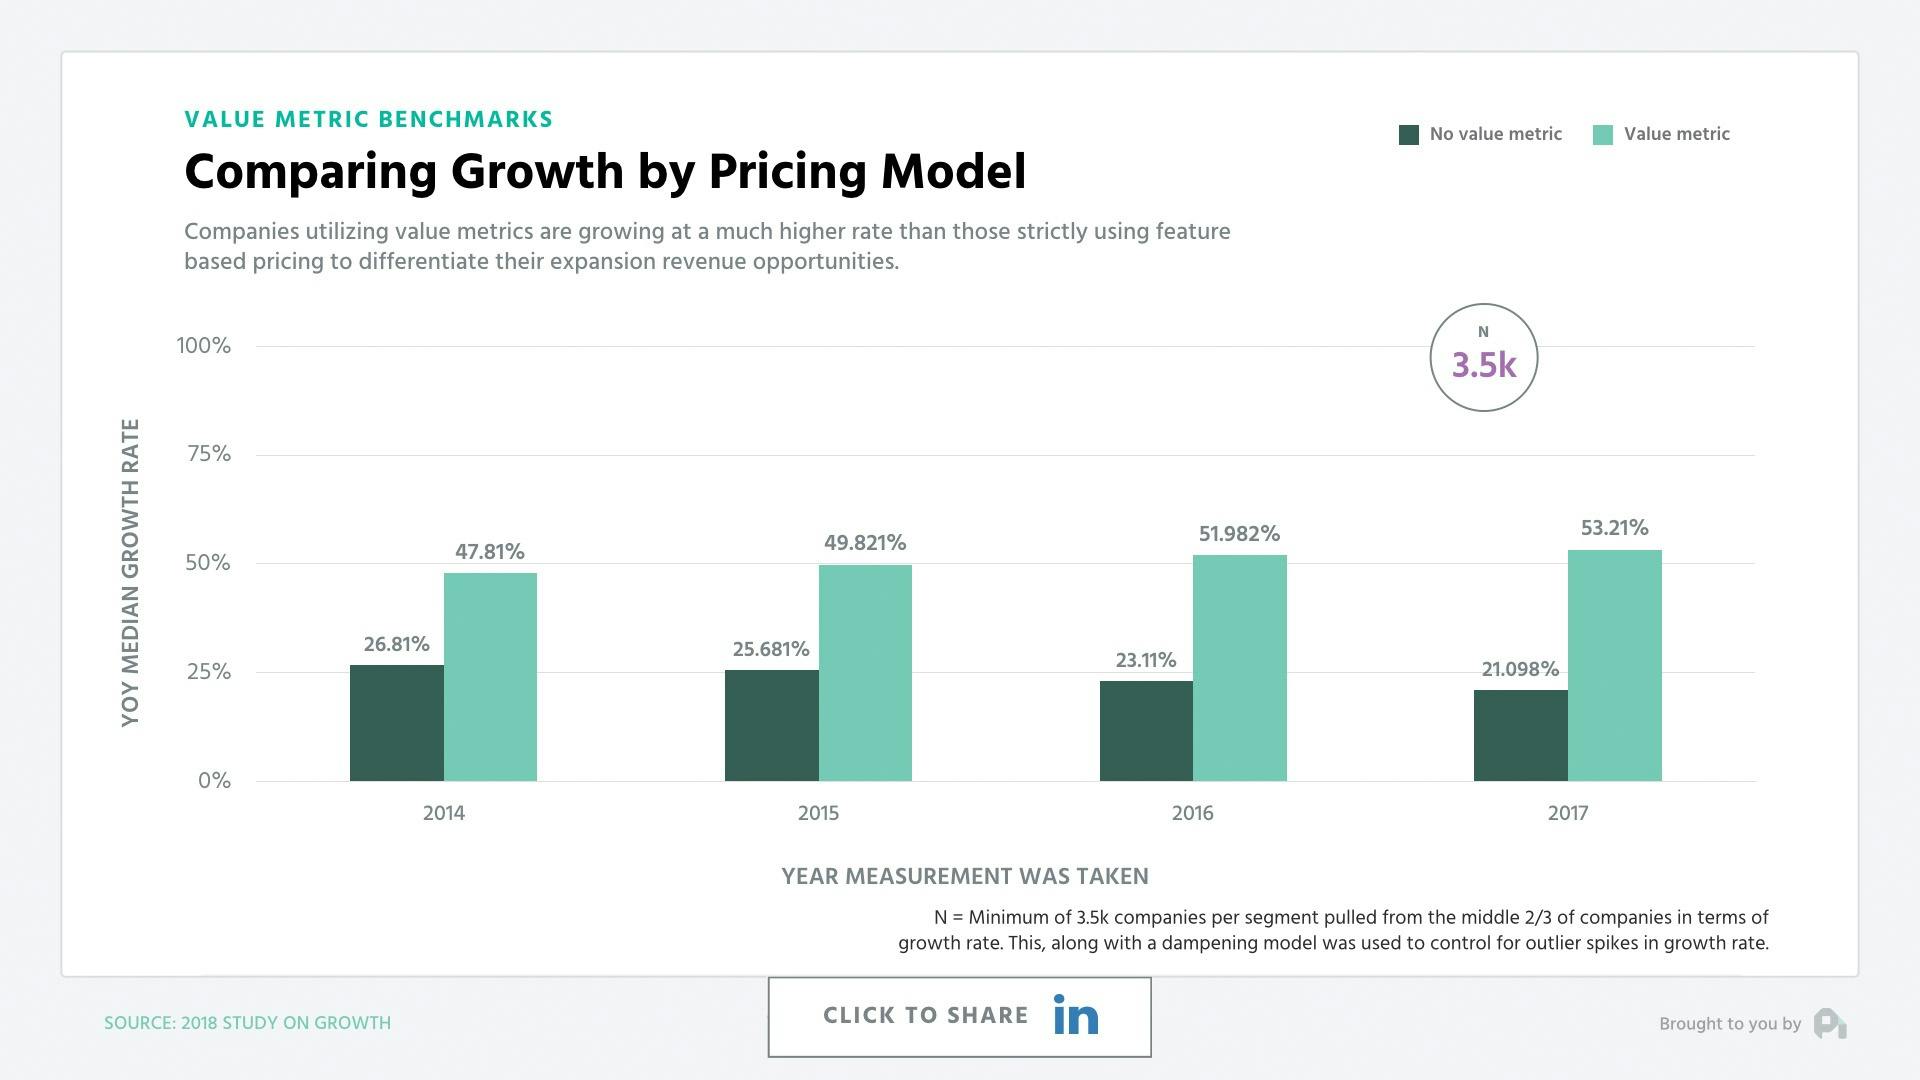 Comparing Growth by Pricing Model